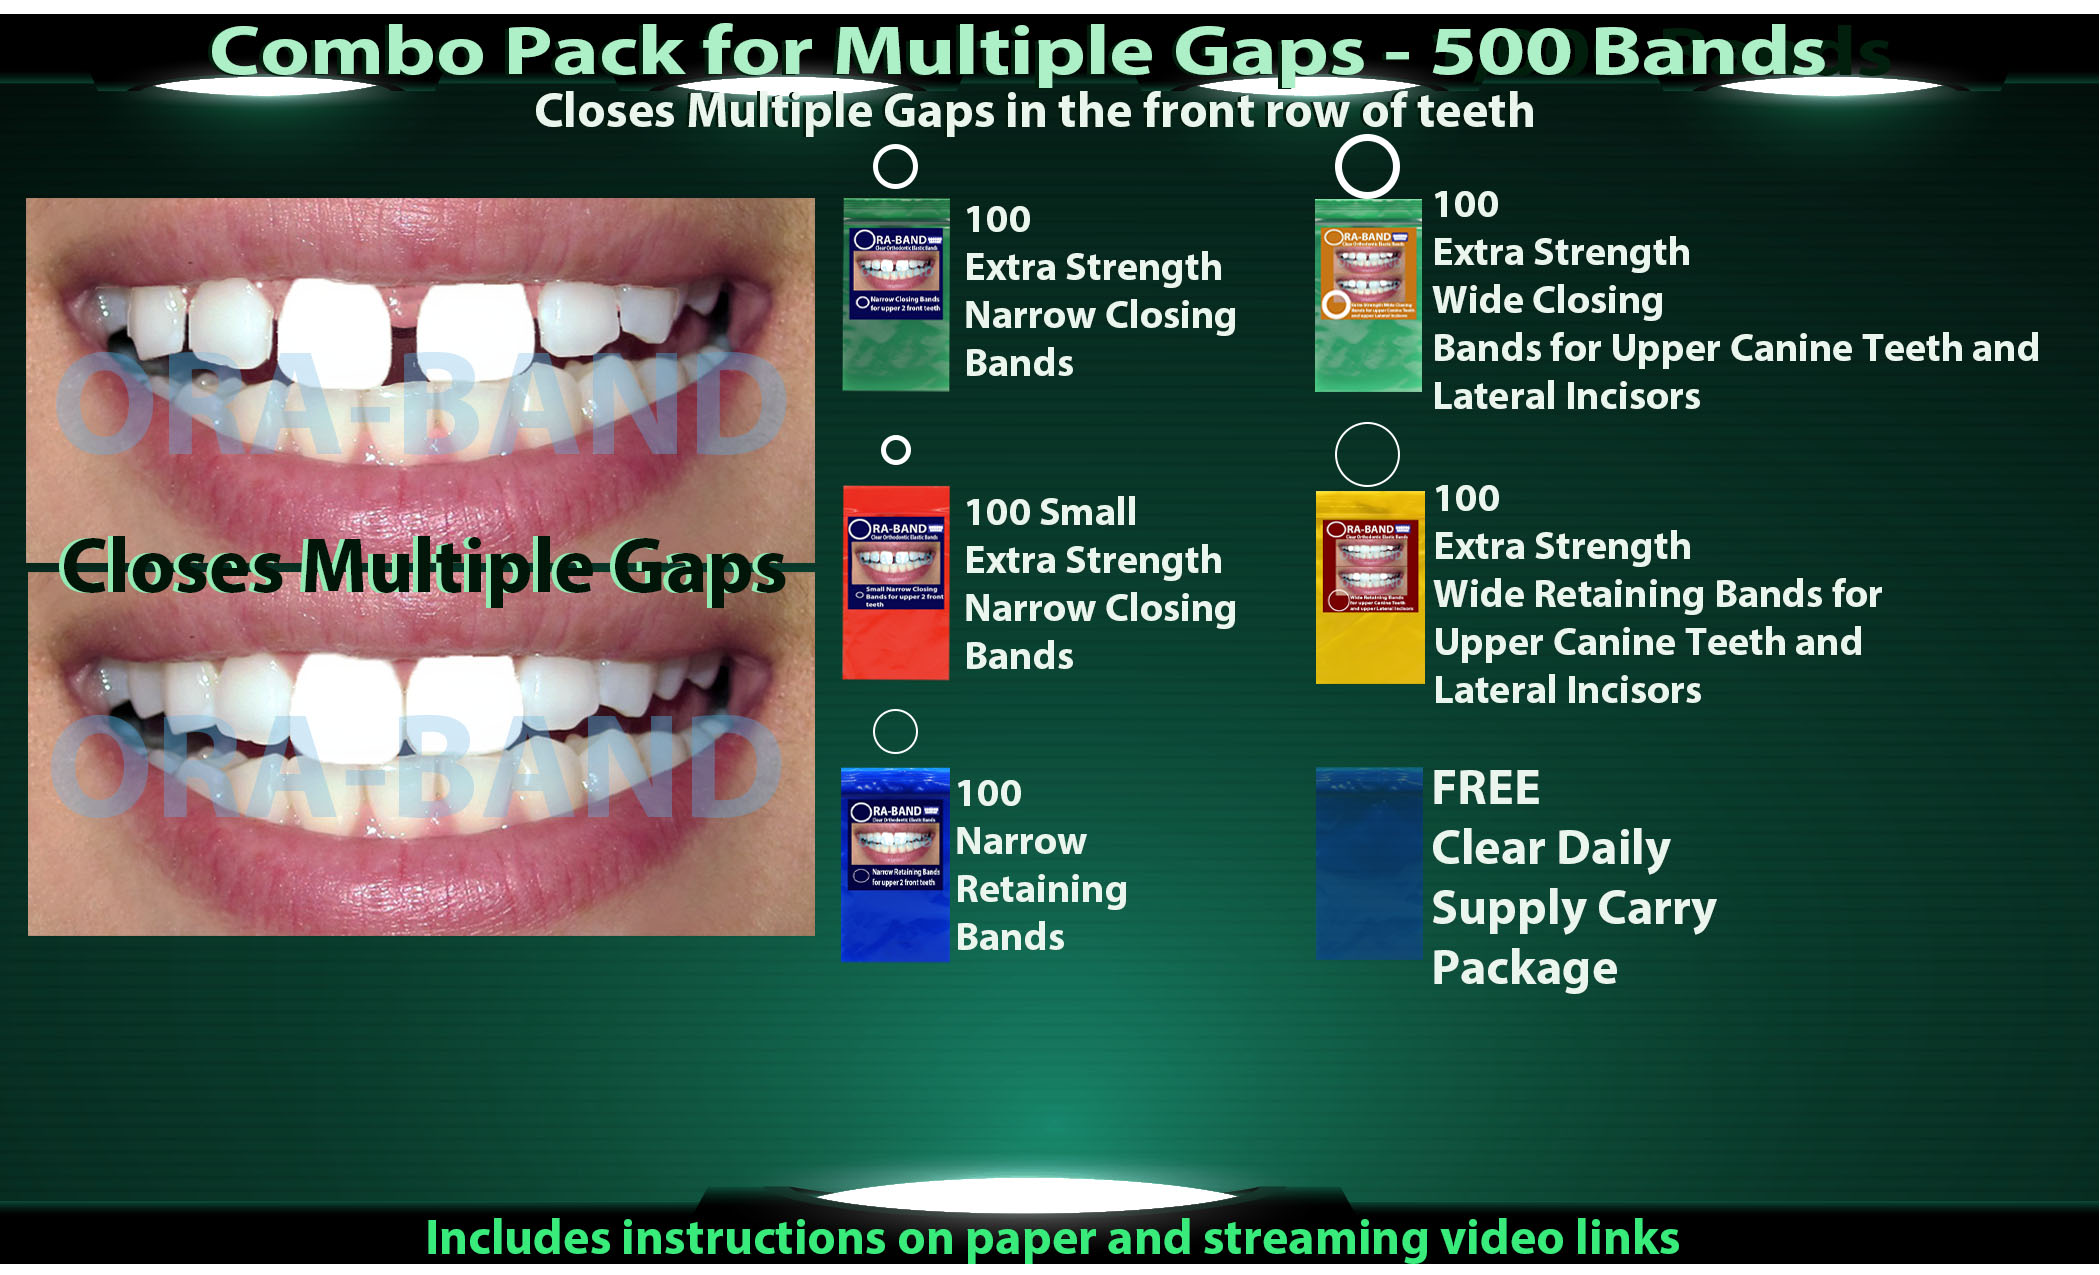 ORA-BAND 500 Band Combo Pack for Multiple Gaps in your front row of teeth